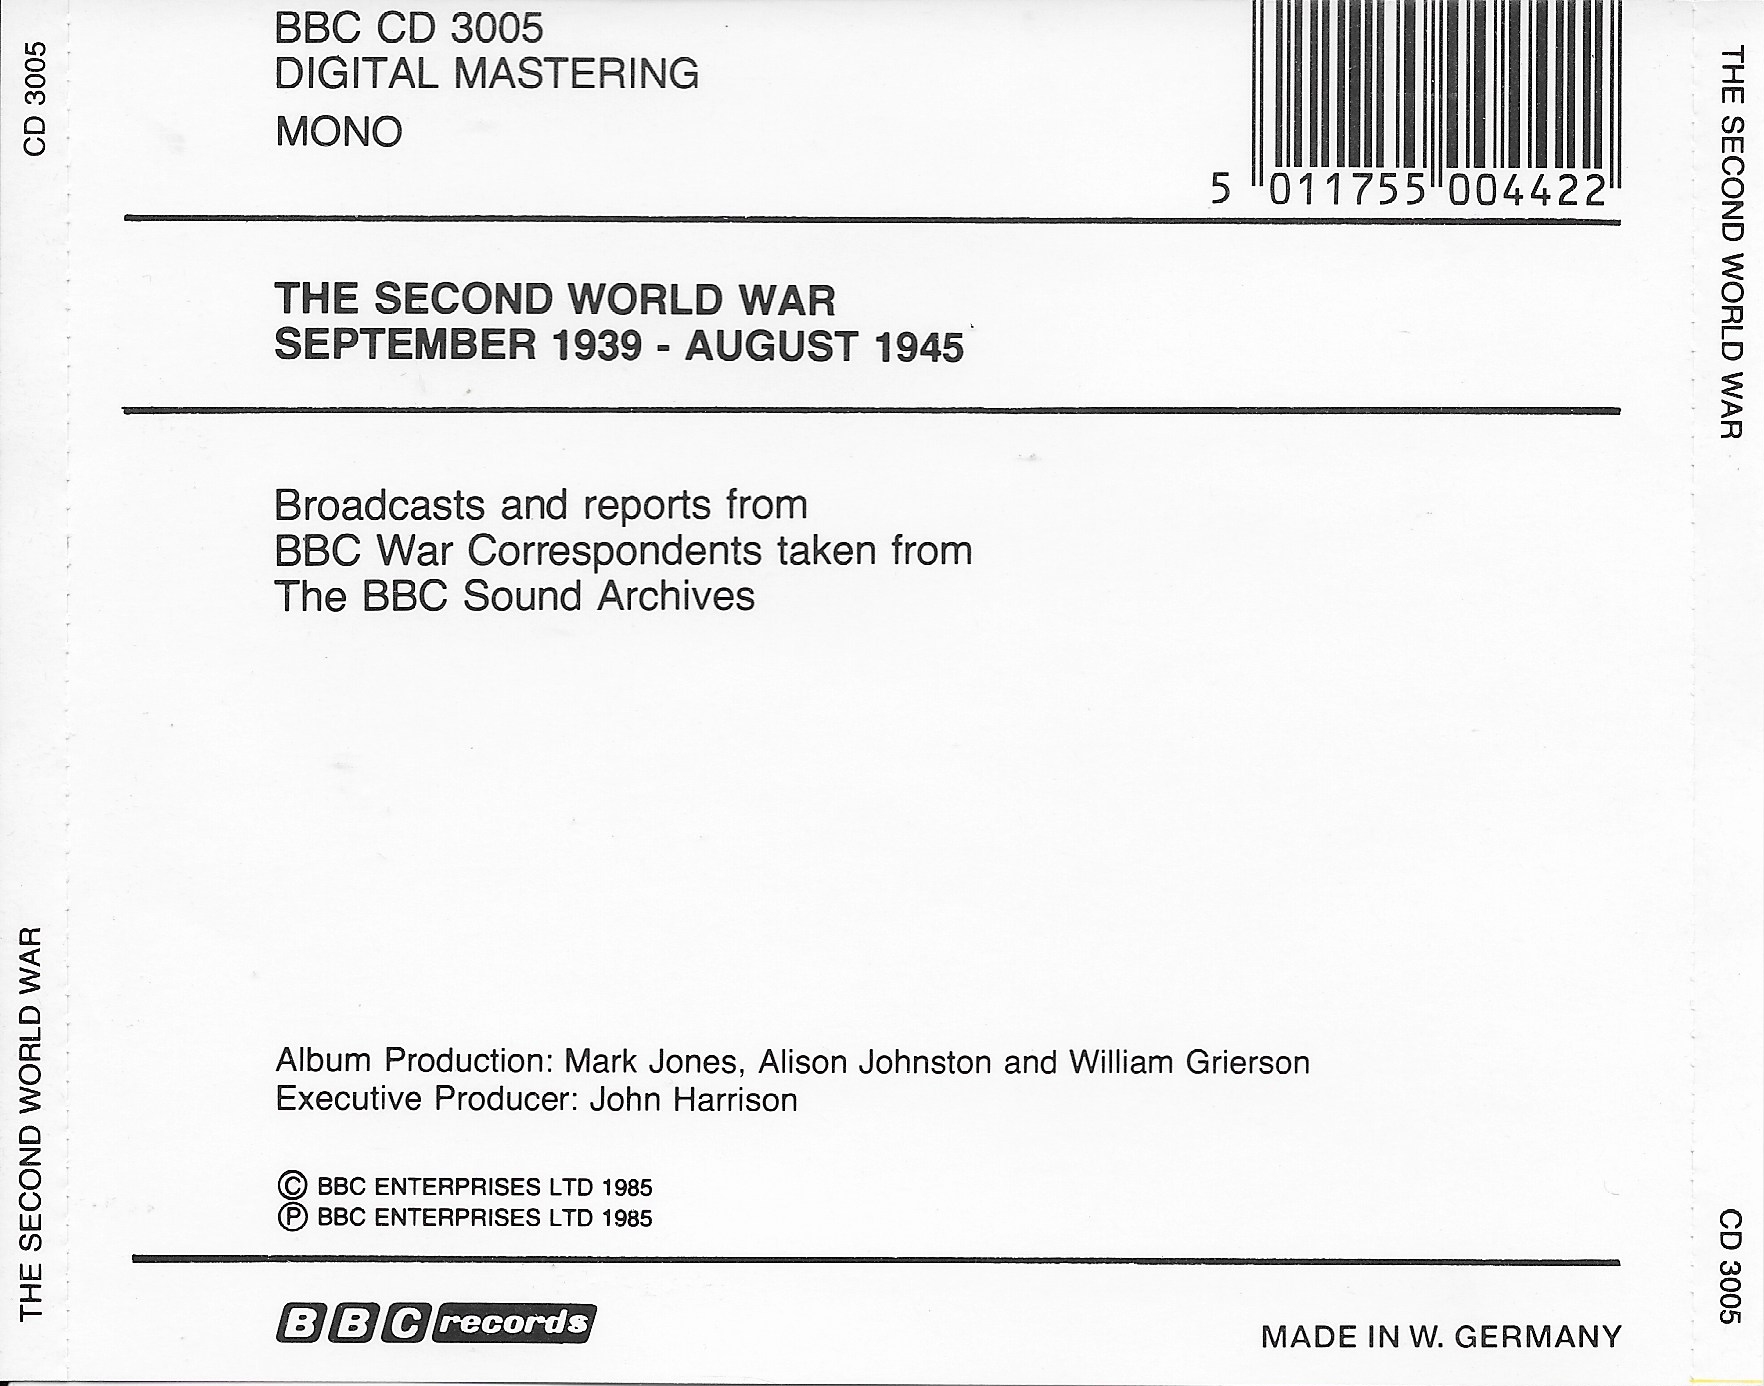 Picture of BBCCD3005 The second World war 1939 -1945 by artist Various from the BBC records and Tapes library